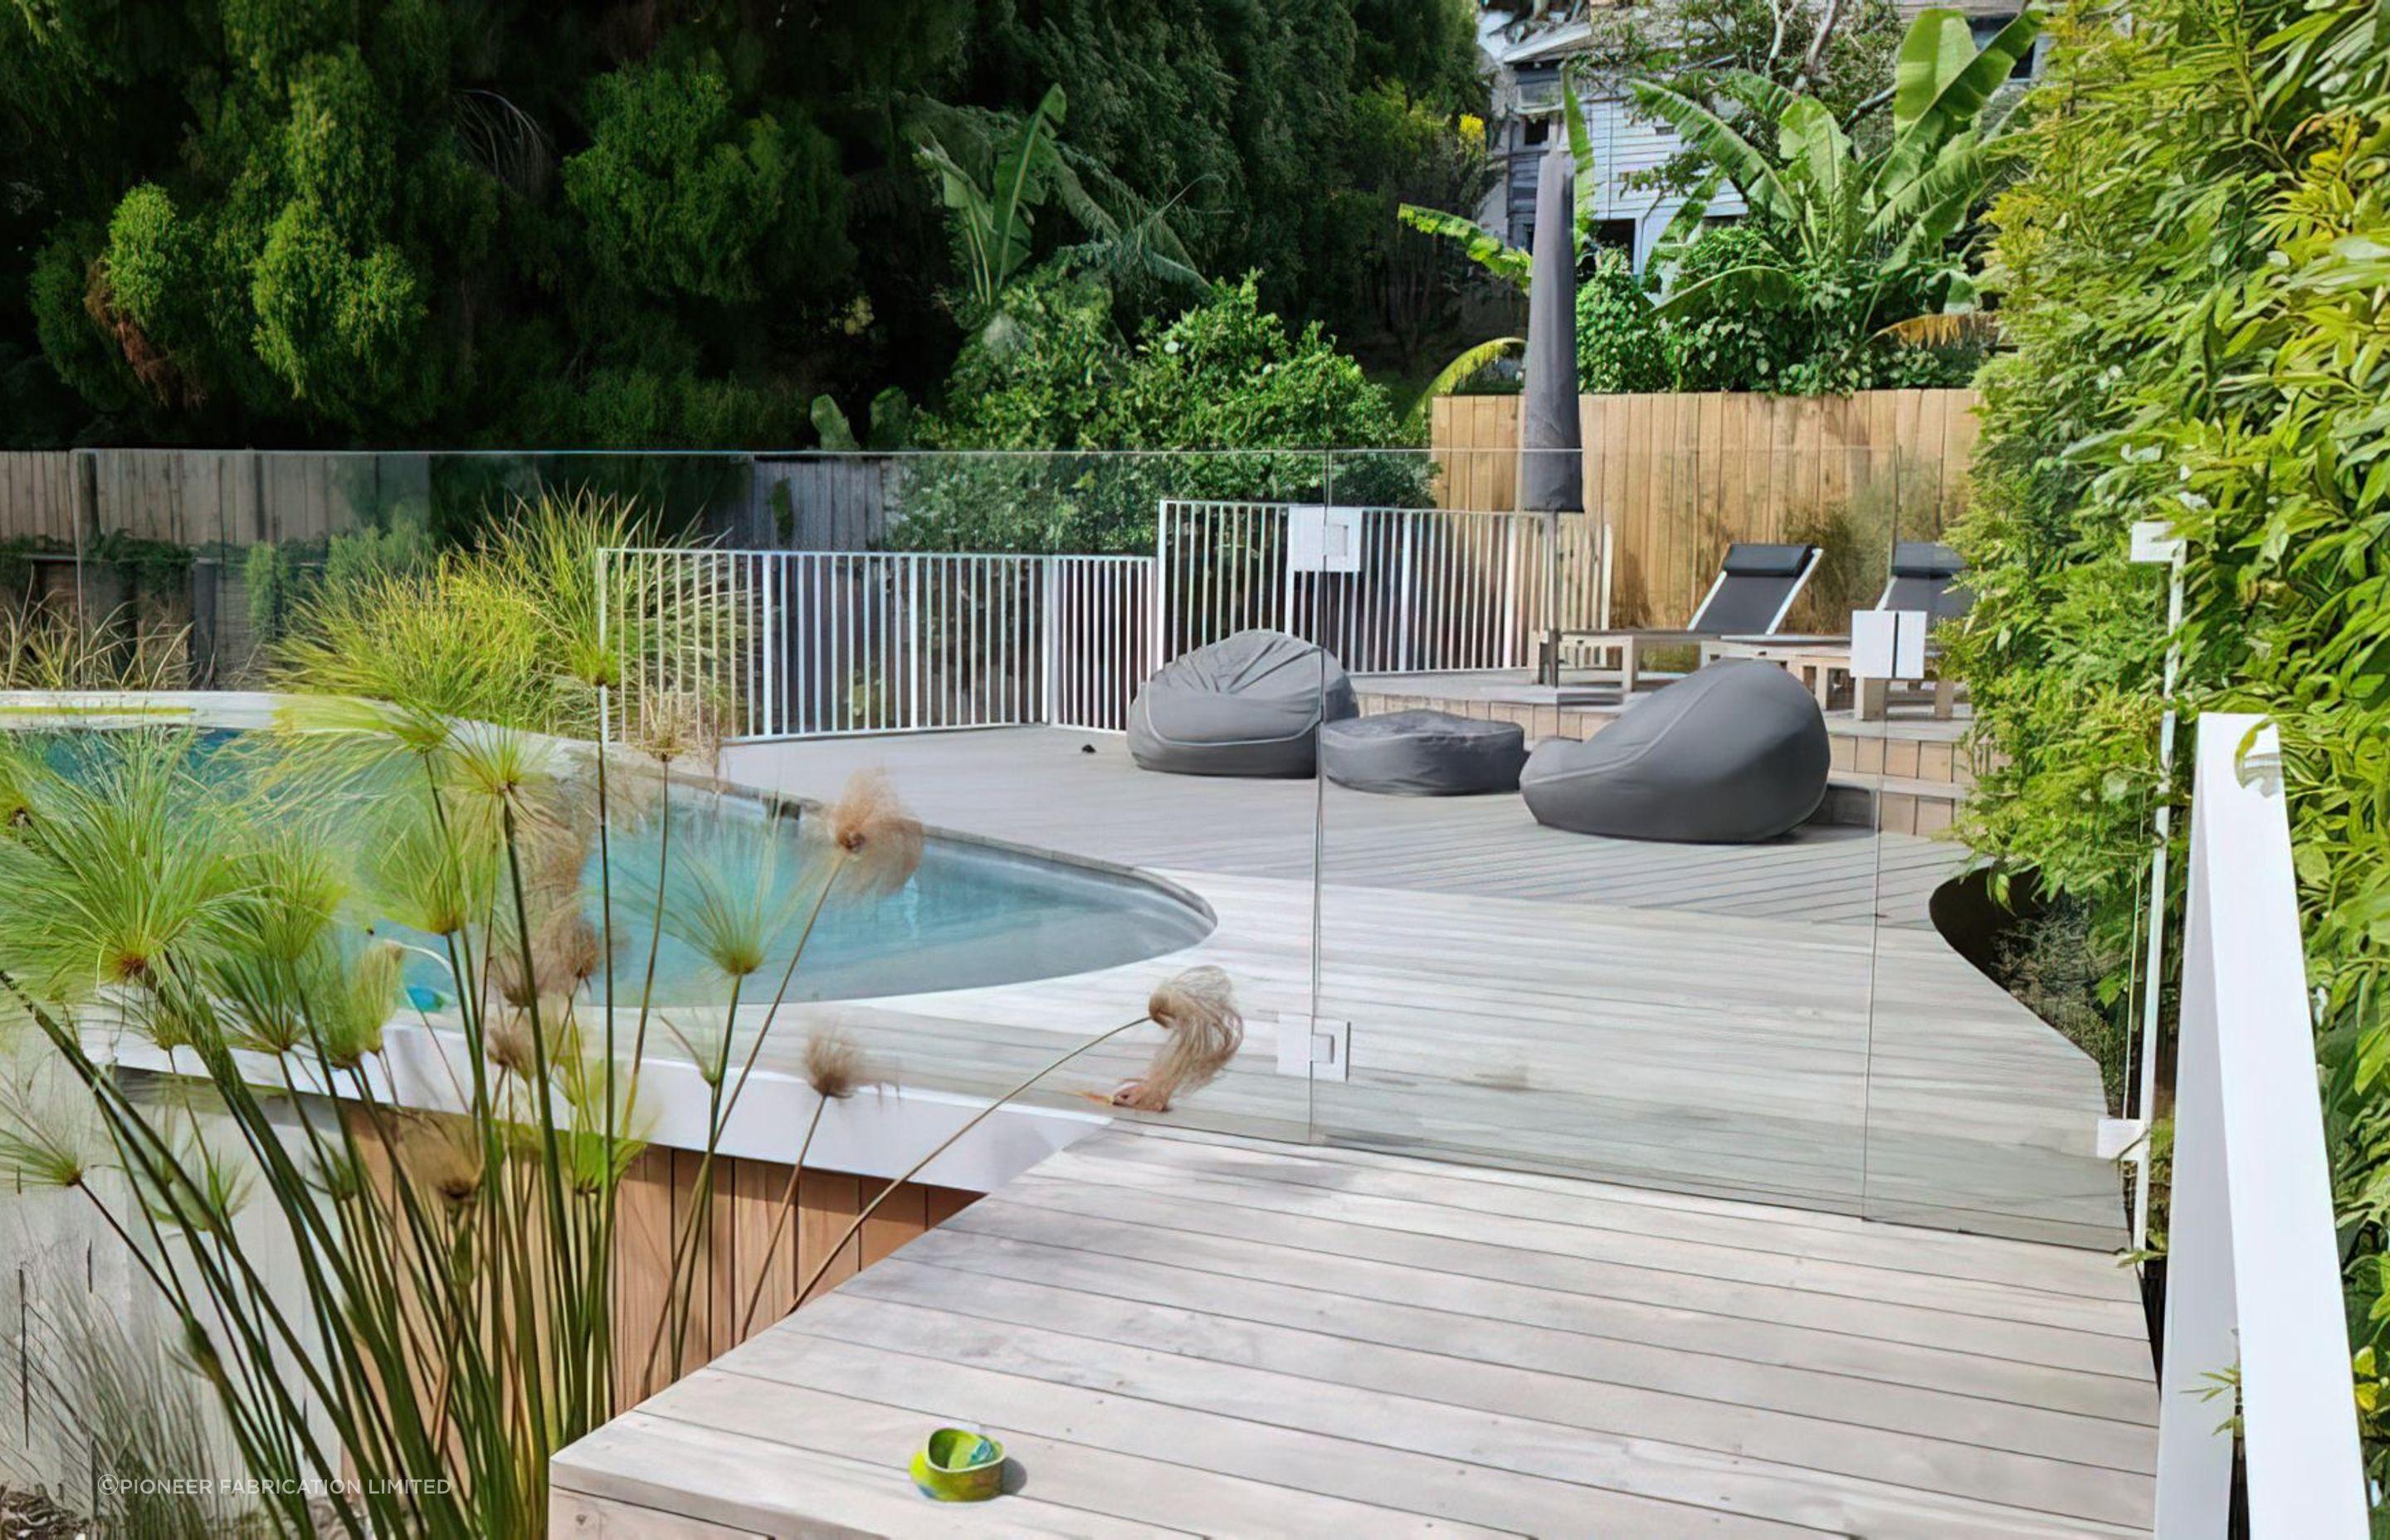 Glass fencing is a great way to keep your pool area safe without compromising on style, seen here with Pioneer Fabrication Limited